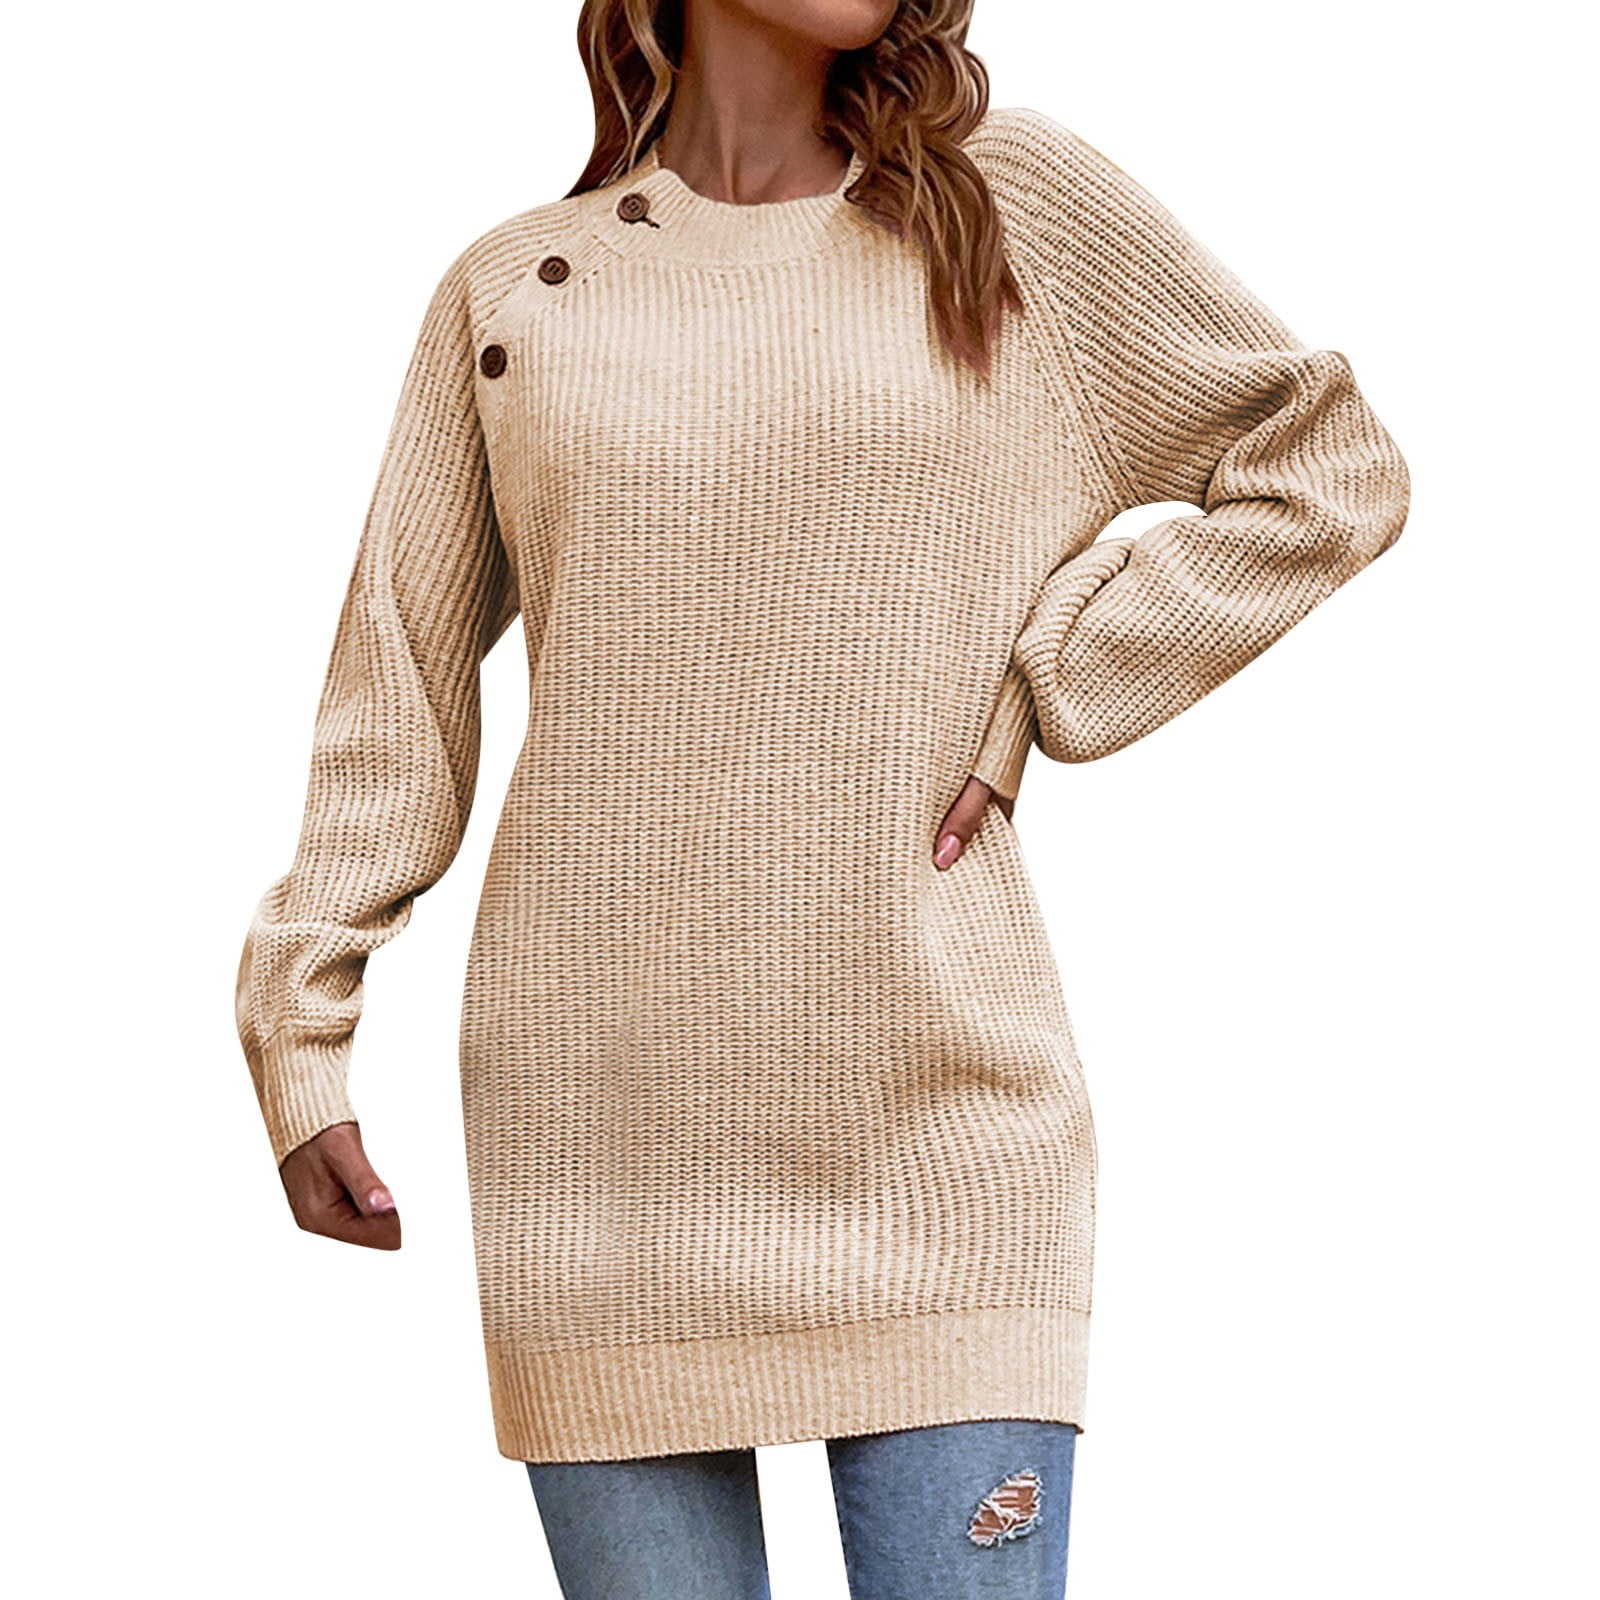 Fashionable Solid Cable-knit Turtleneck Casual Long Sweater Dress for Women  Women's Sweater Dress white S